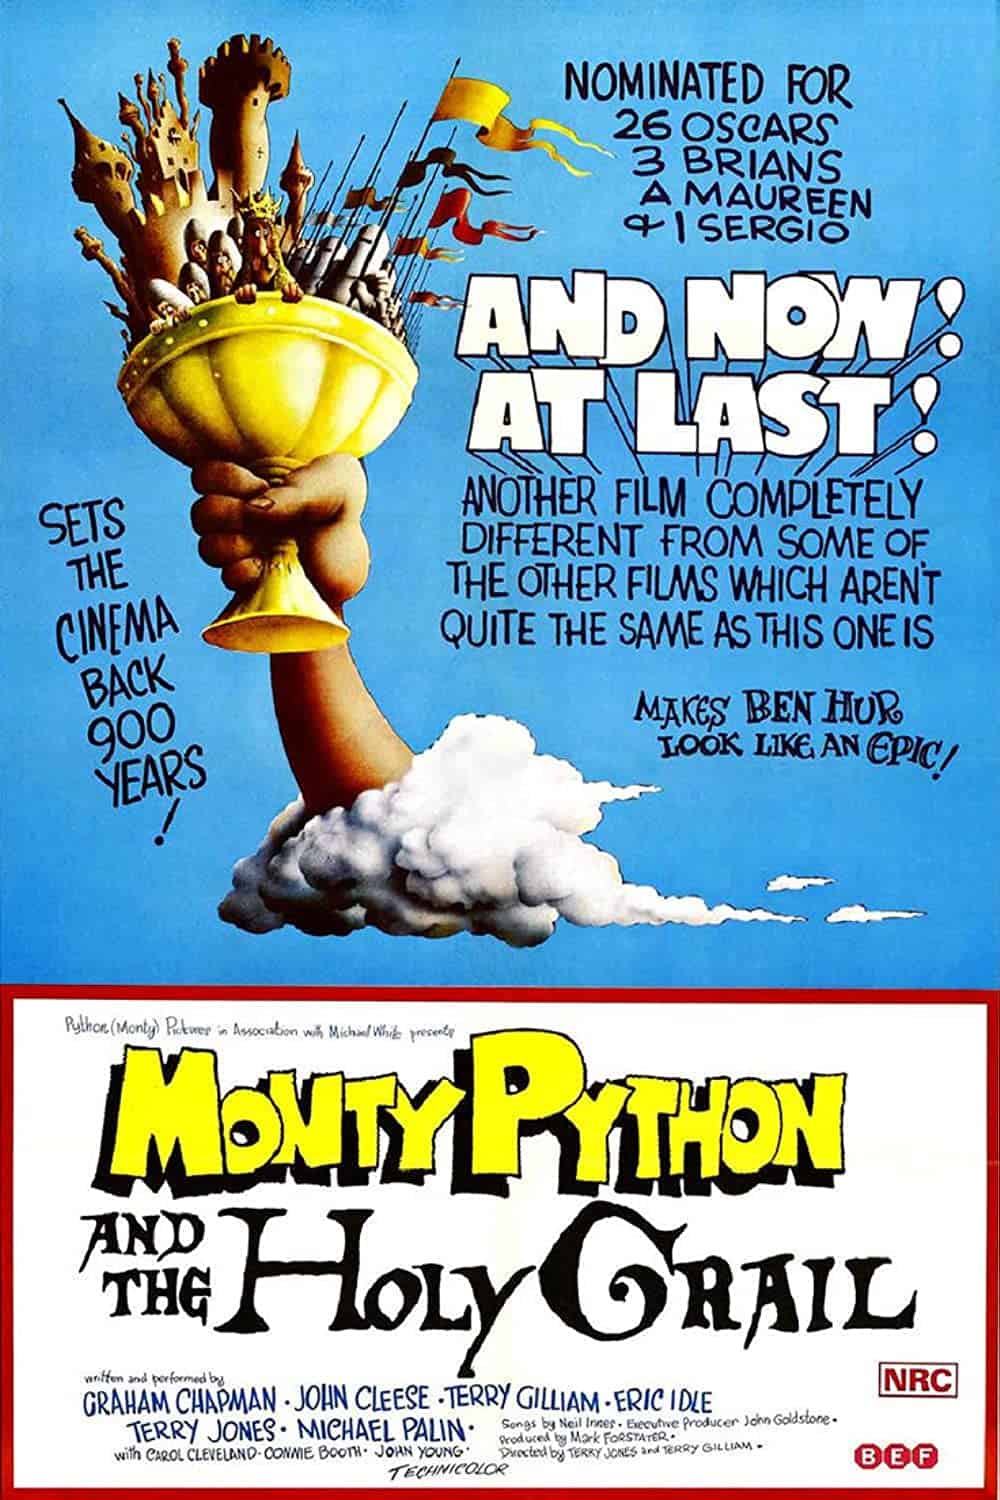 Monty Python And The Holy Grail (1975)